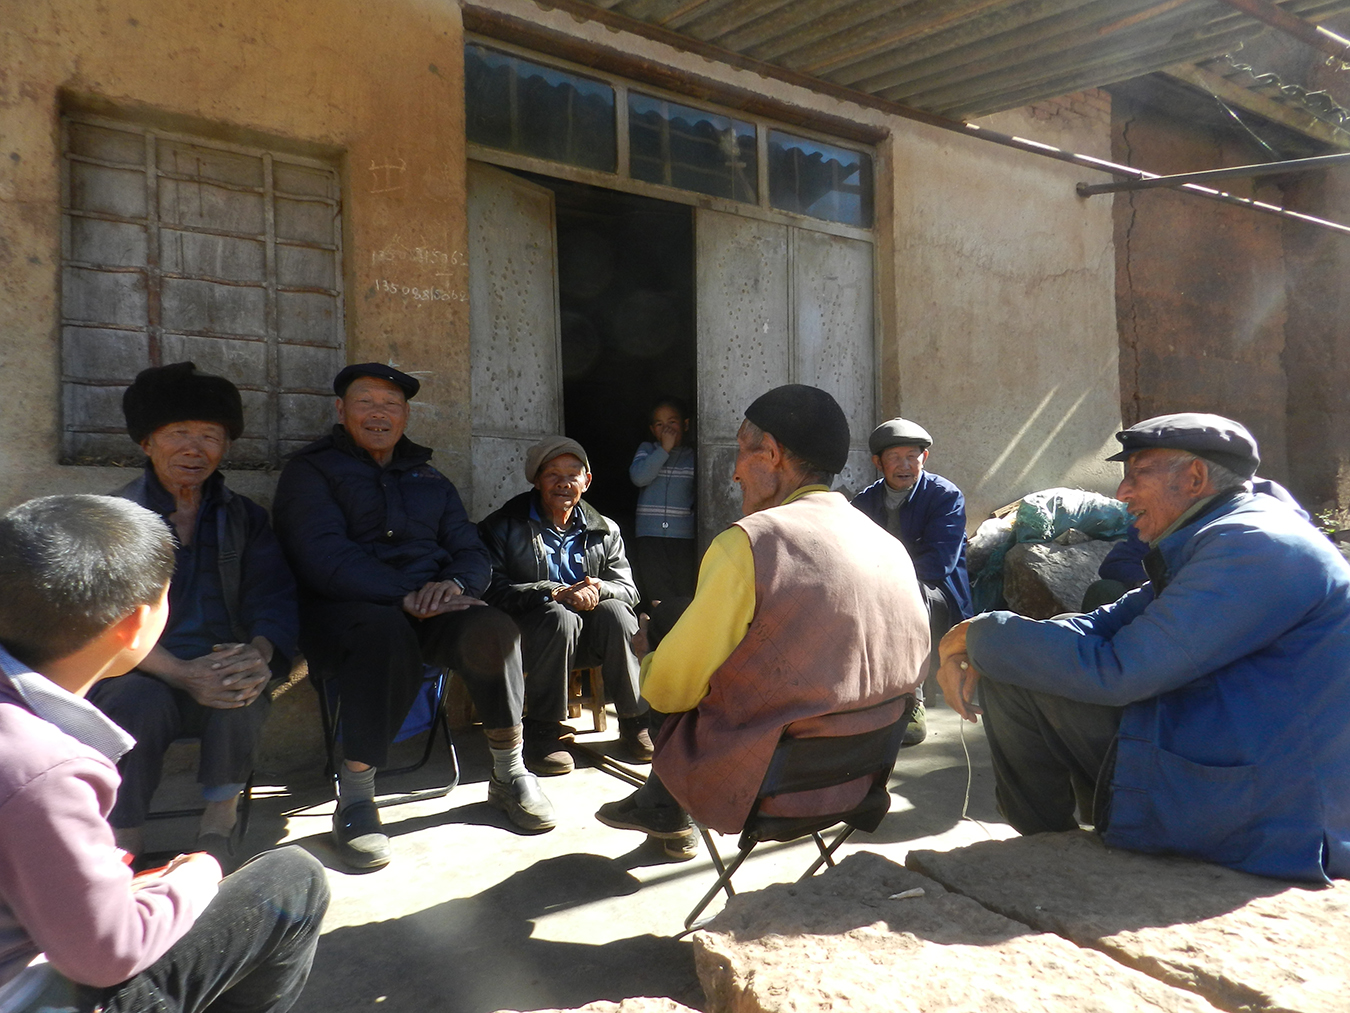 A group of elders discusses the details of a dispute agreement. Photo by Andrea E. Pia.